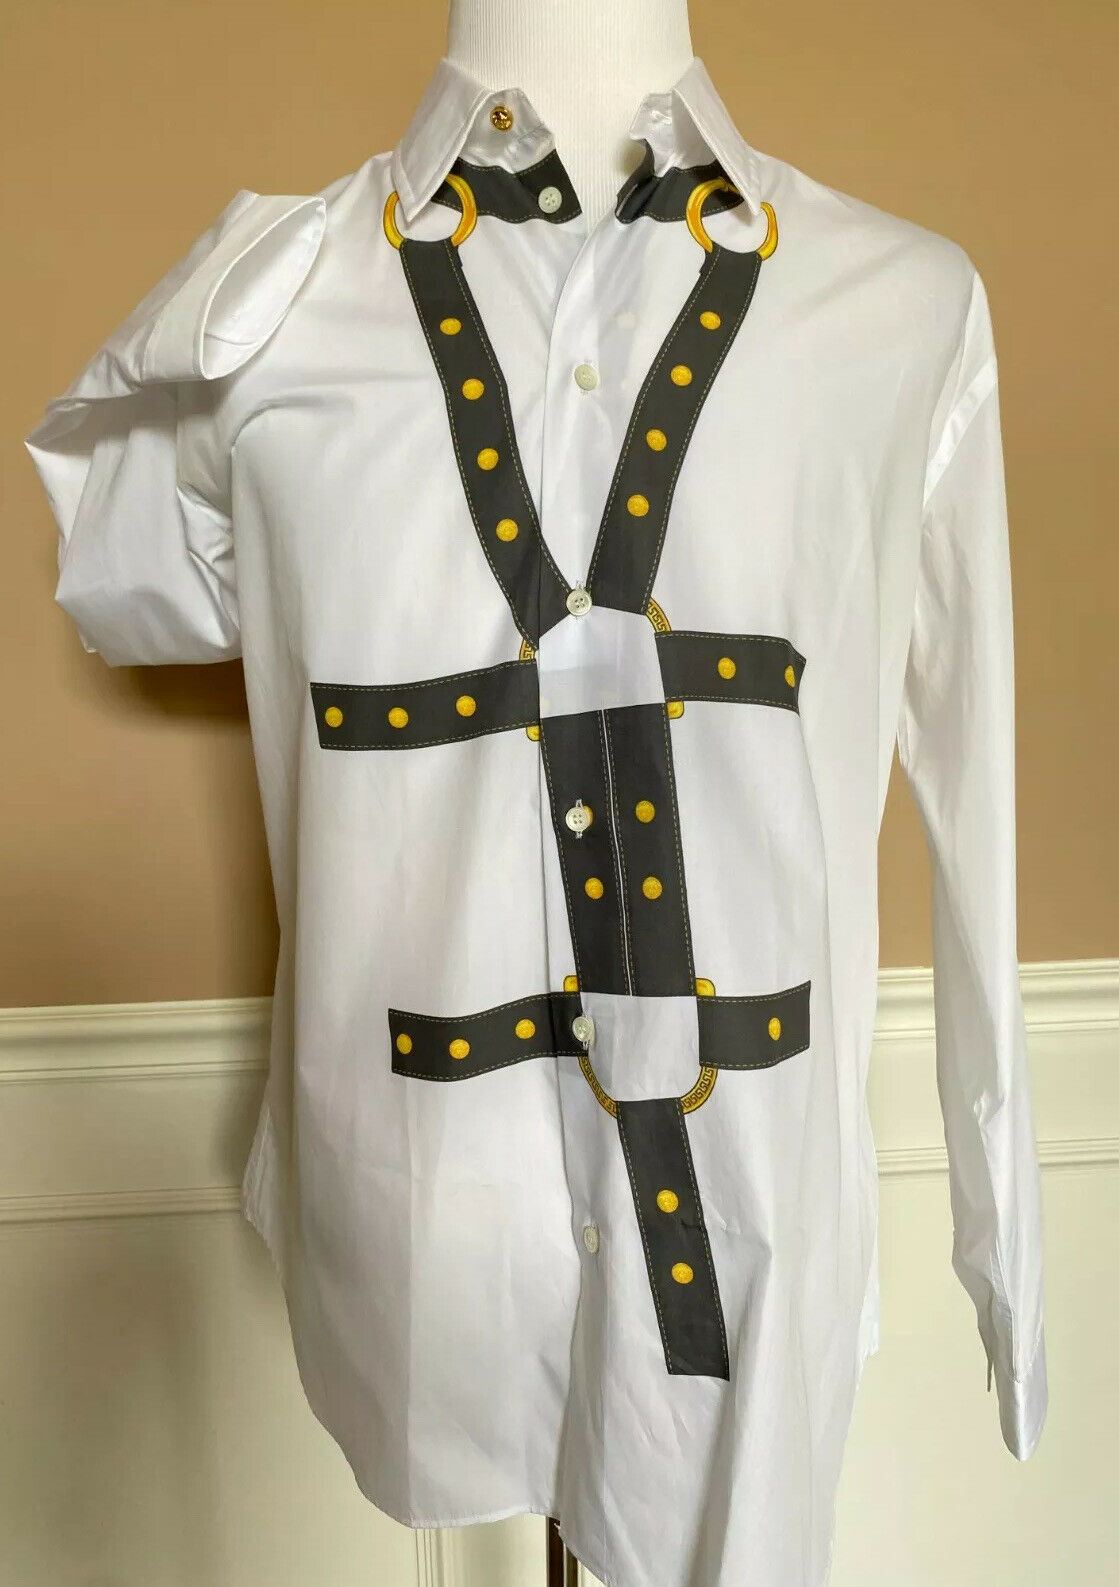 NWT $650 Versace Harness Print Graphic White Dress Shirt Size 42 A83678 Italy